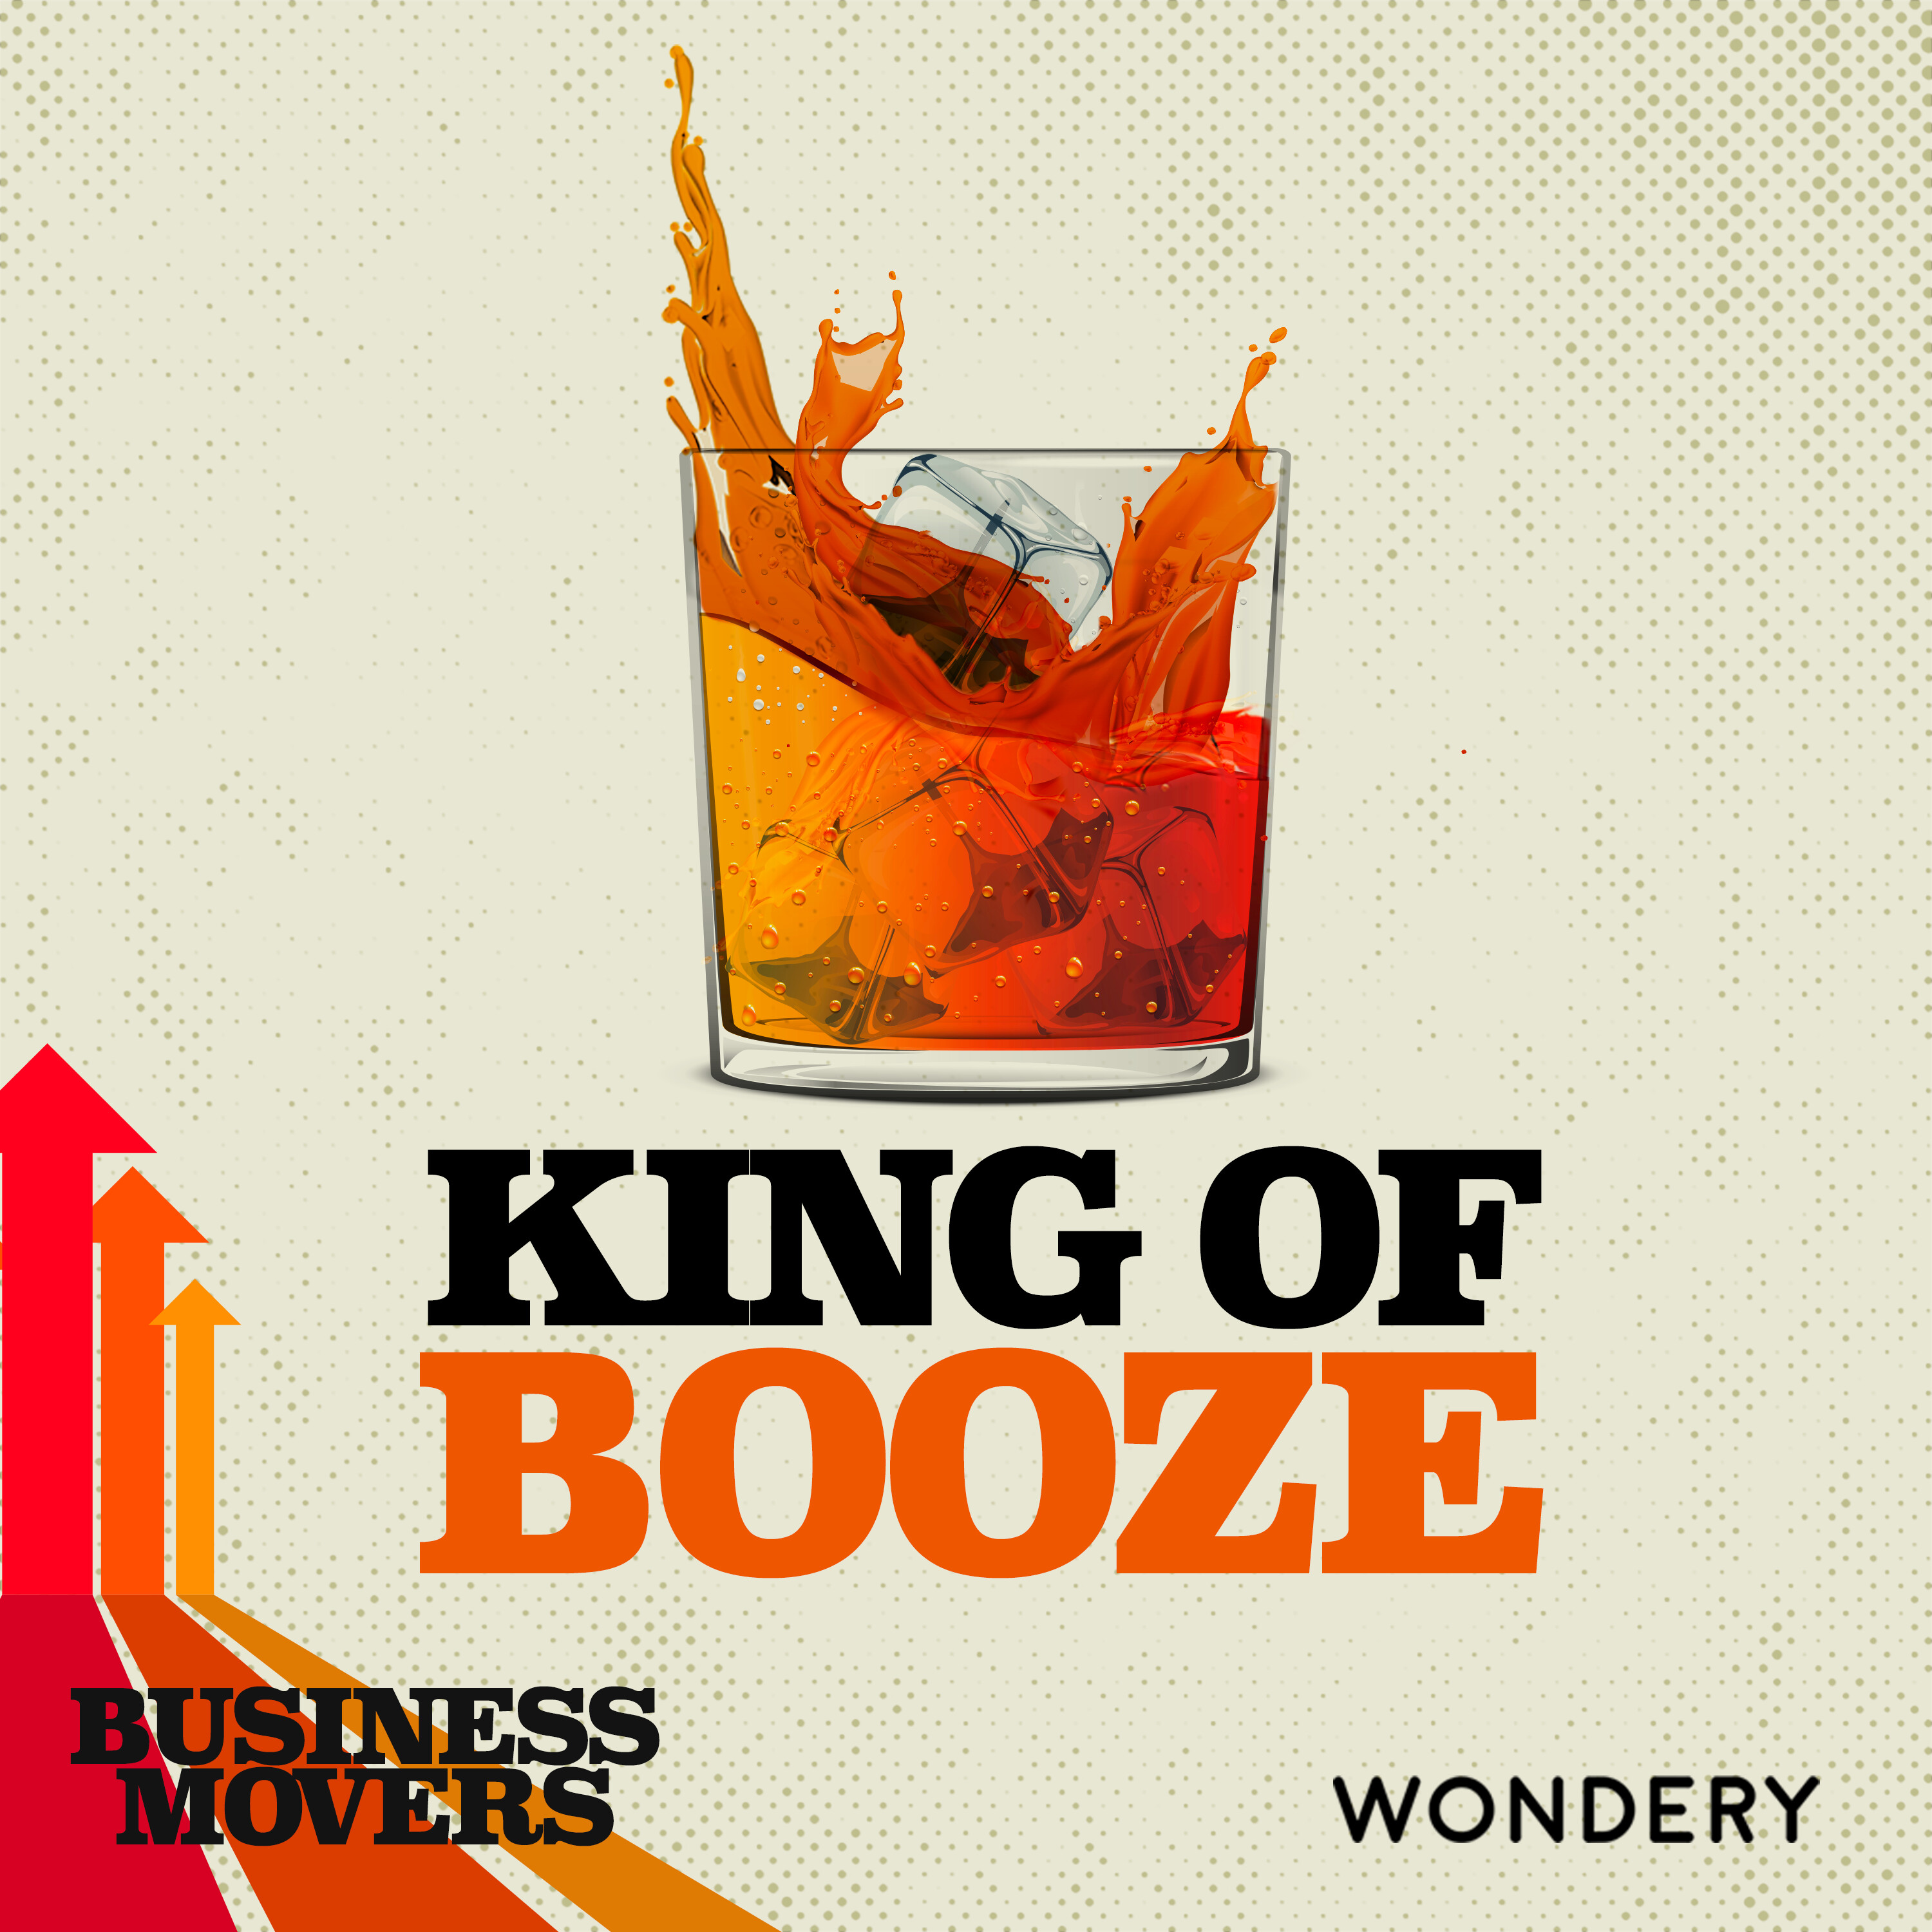 The King of Booze | Cultural Historian Bob Batchelor Breaks Down the King of Booze | 5